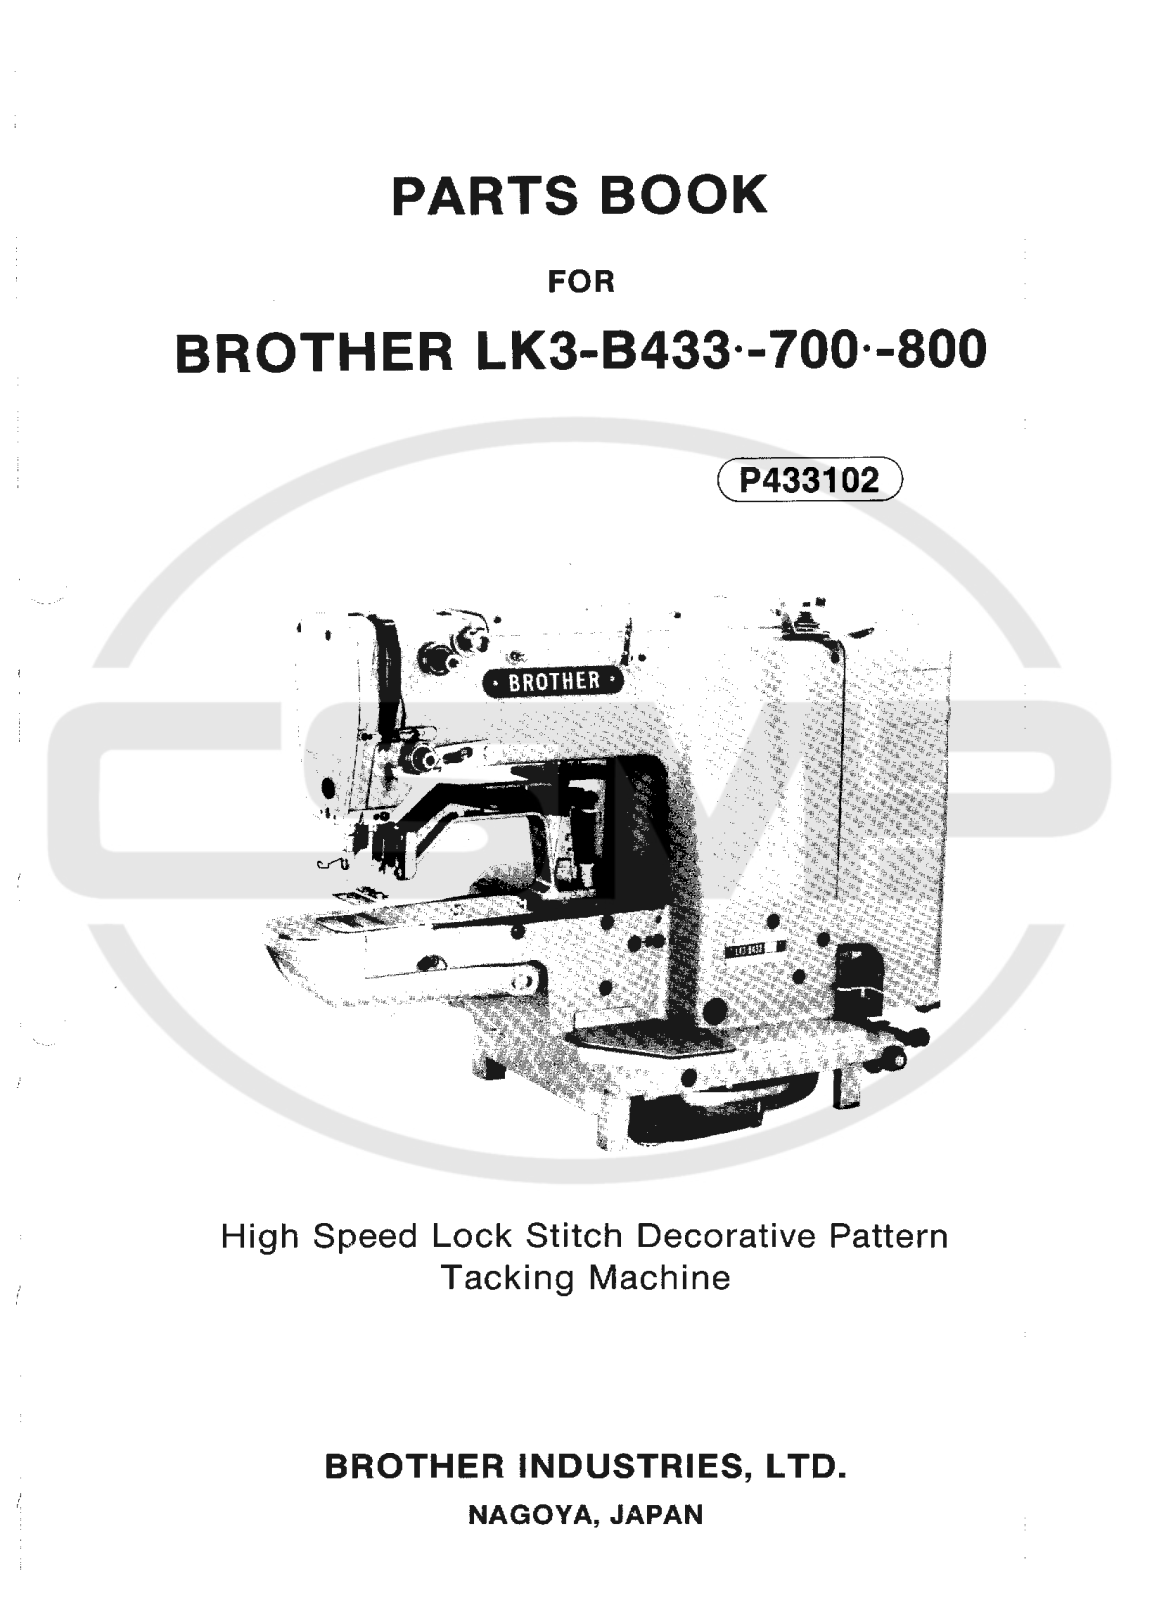 Brother LK3 B433-700-800 Parts Book